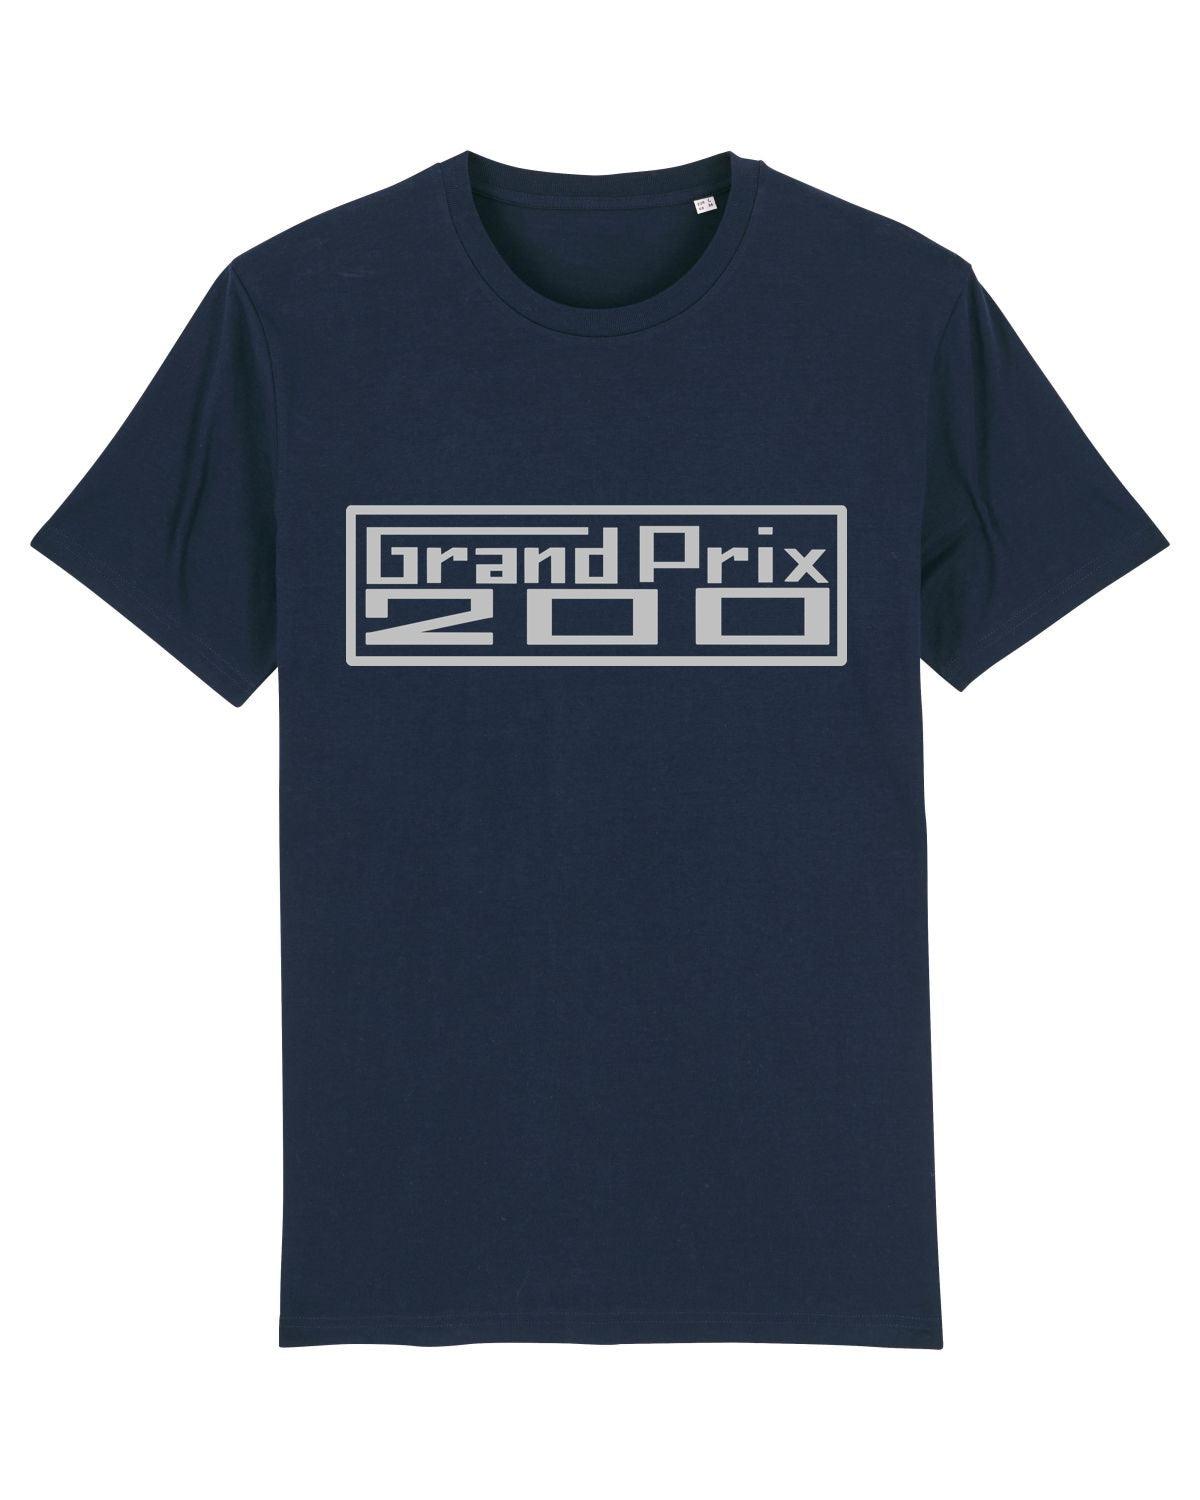 GRAND PRIX 200: T-Shirt Inspired by Classic Lambretta Scooters (Silver Badge) - SOUND IS COLOUR